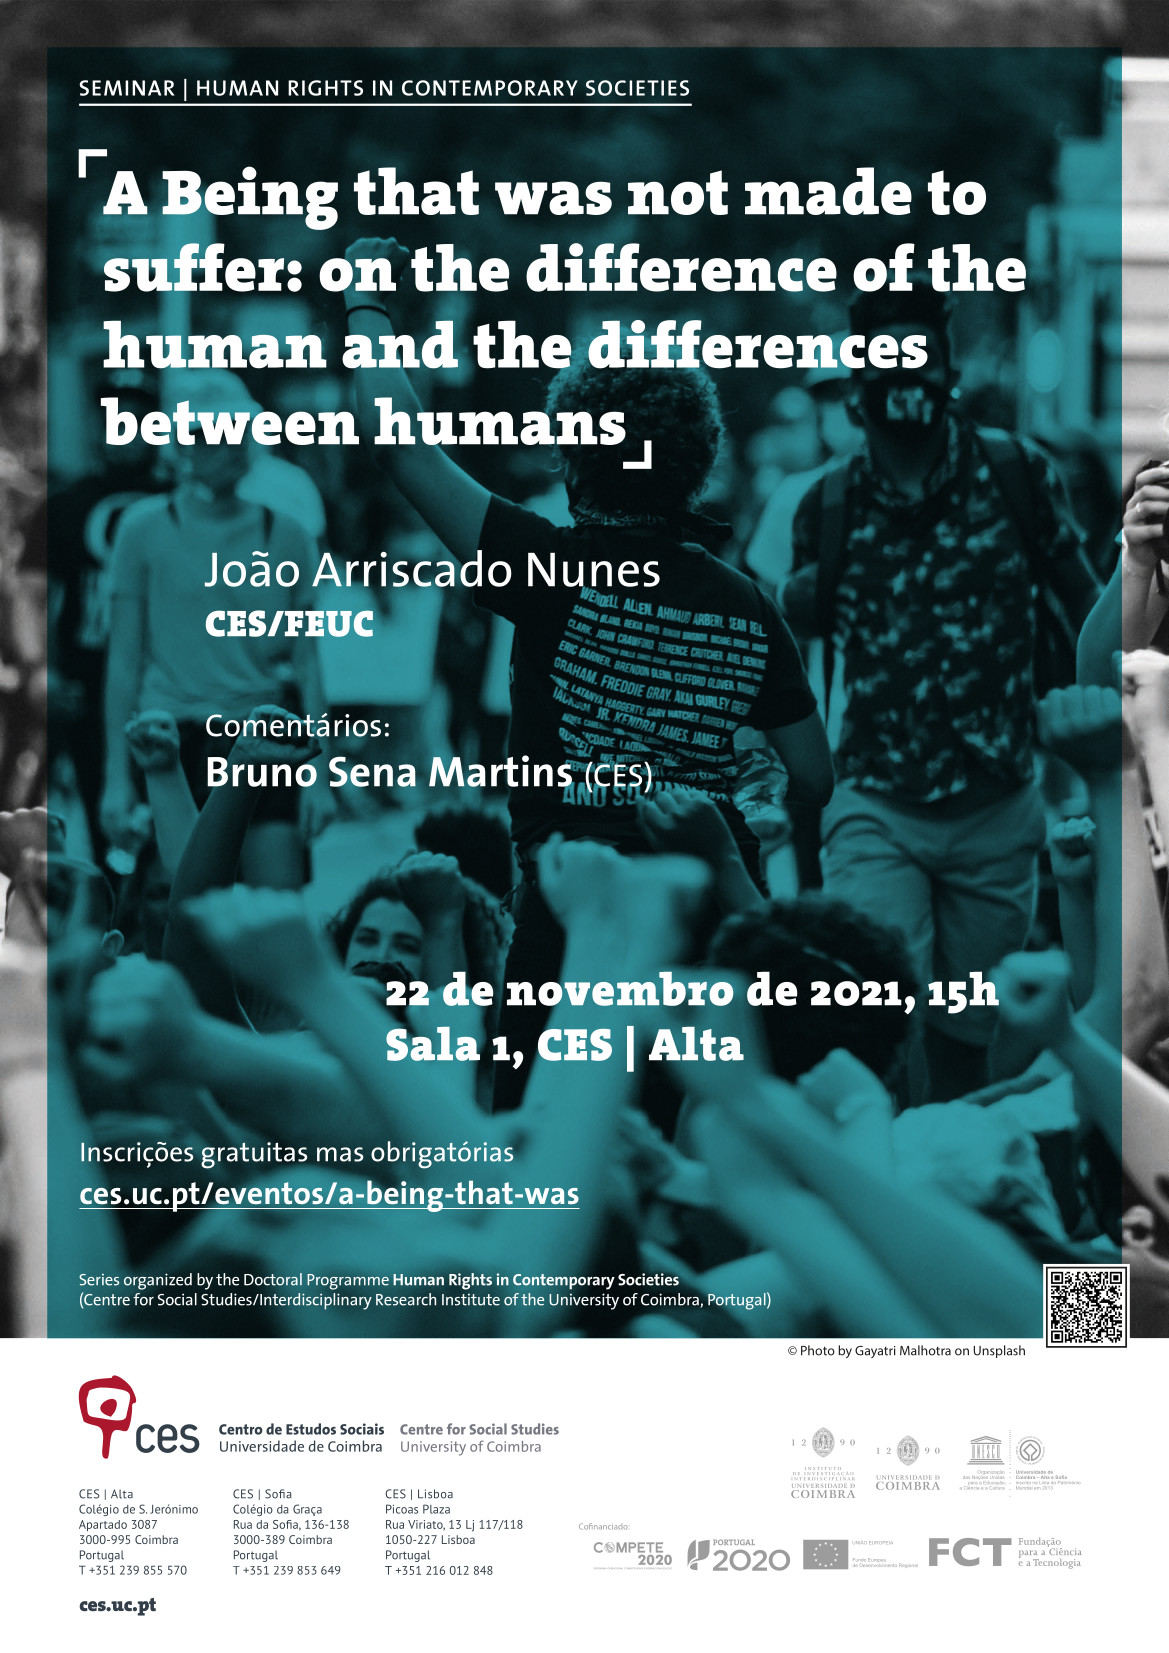 A Being that was not made to suffer: on the difference of the human and the differences between humans<span id="edit_35529"><script>$(function() { $('#edit_35529').load( "/myces/user/editobj.php?tipo=evento&id=35529" ); });</script></span>